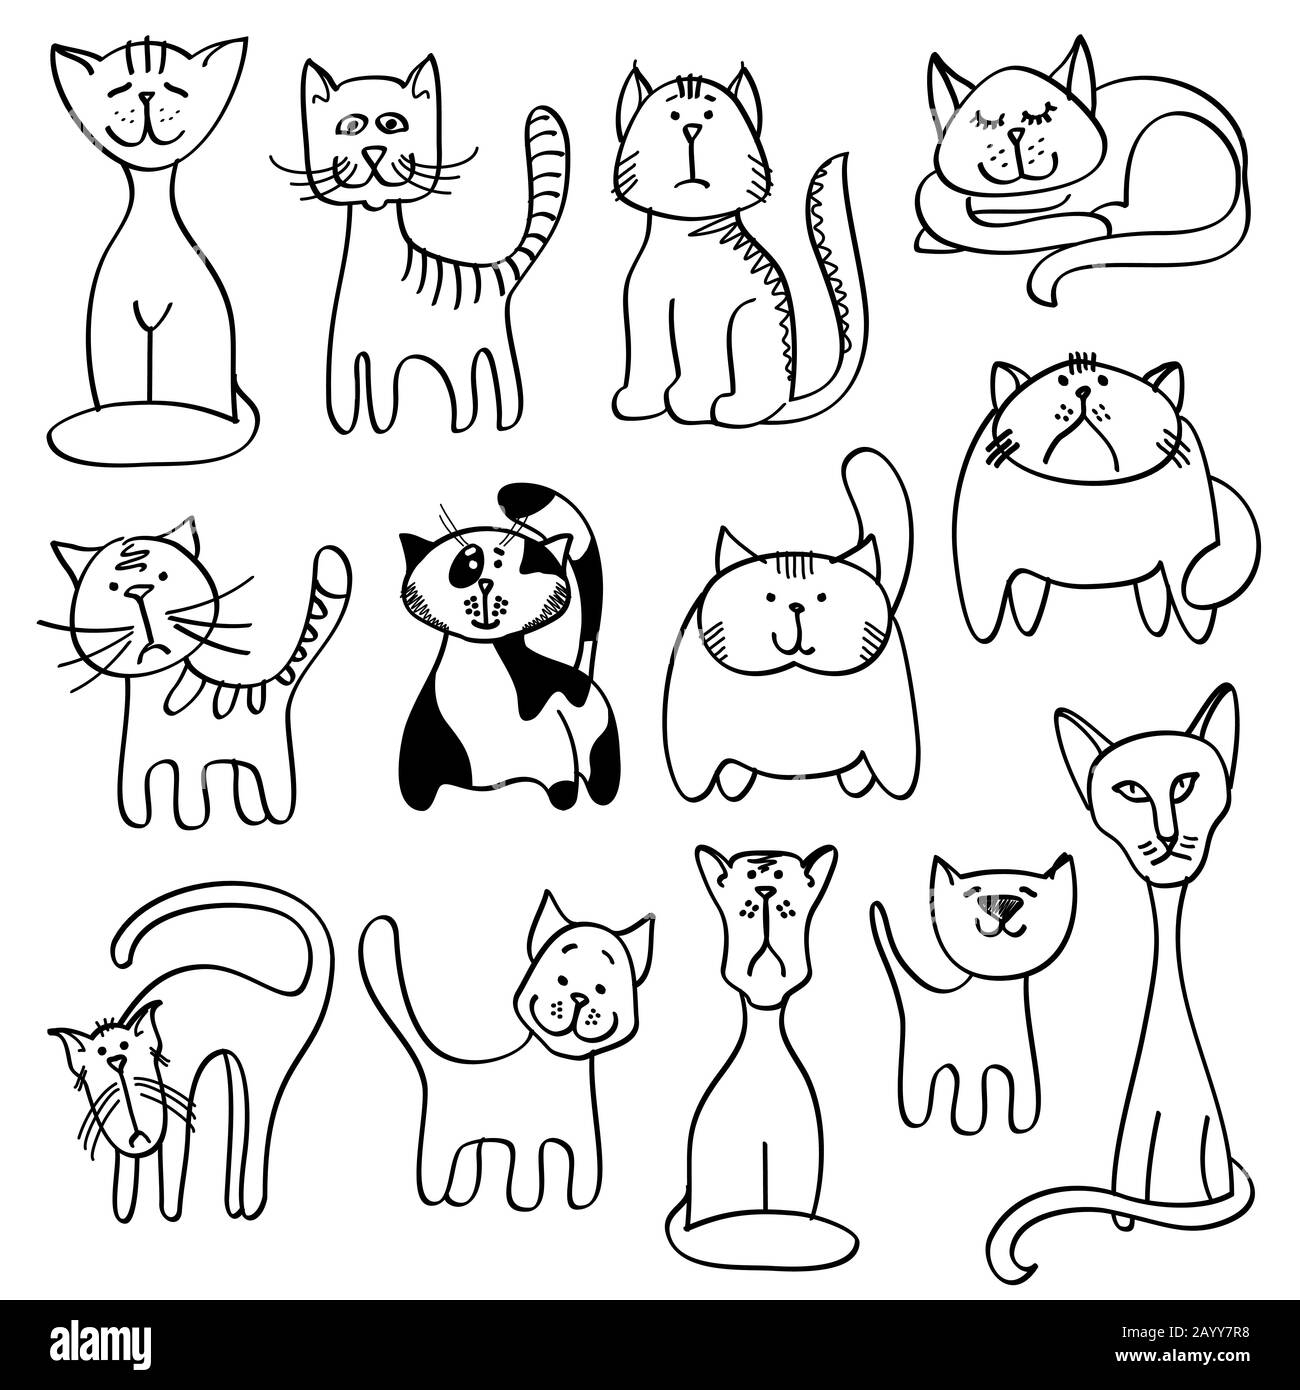 Home pets, cute cats in doodle vector style. Cat animal doodle and set of cat illustration Stock Vector